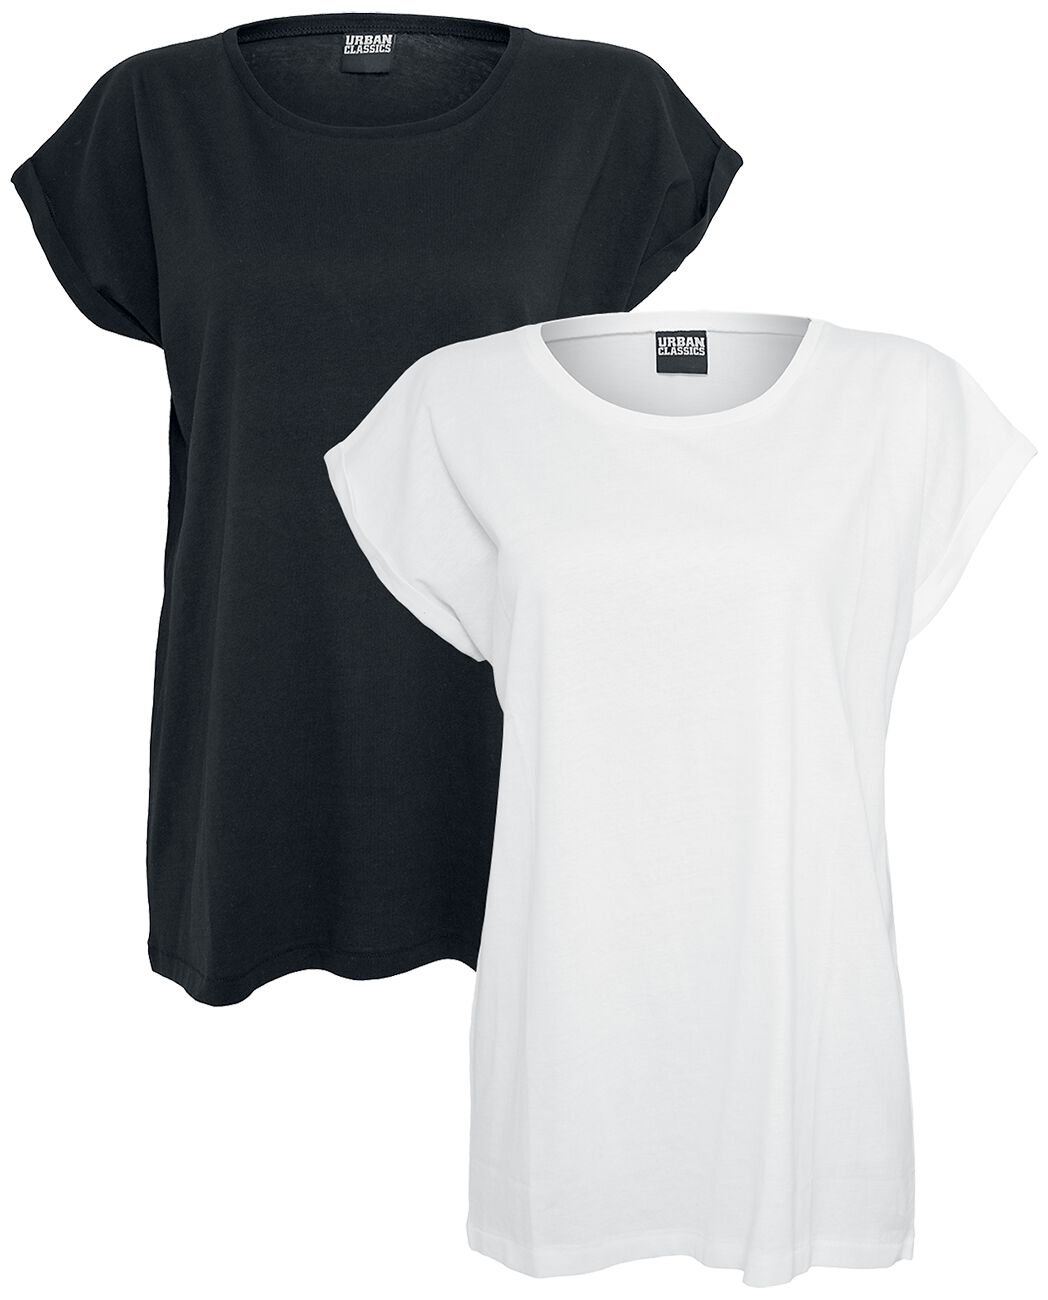 Urban Classics Ladies Extended Shoulder Tee Double Pack T-Shirt schwarz weiß in XS